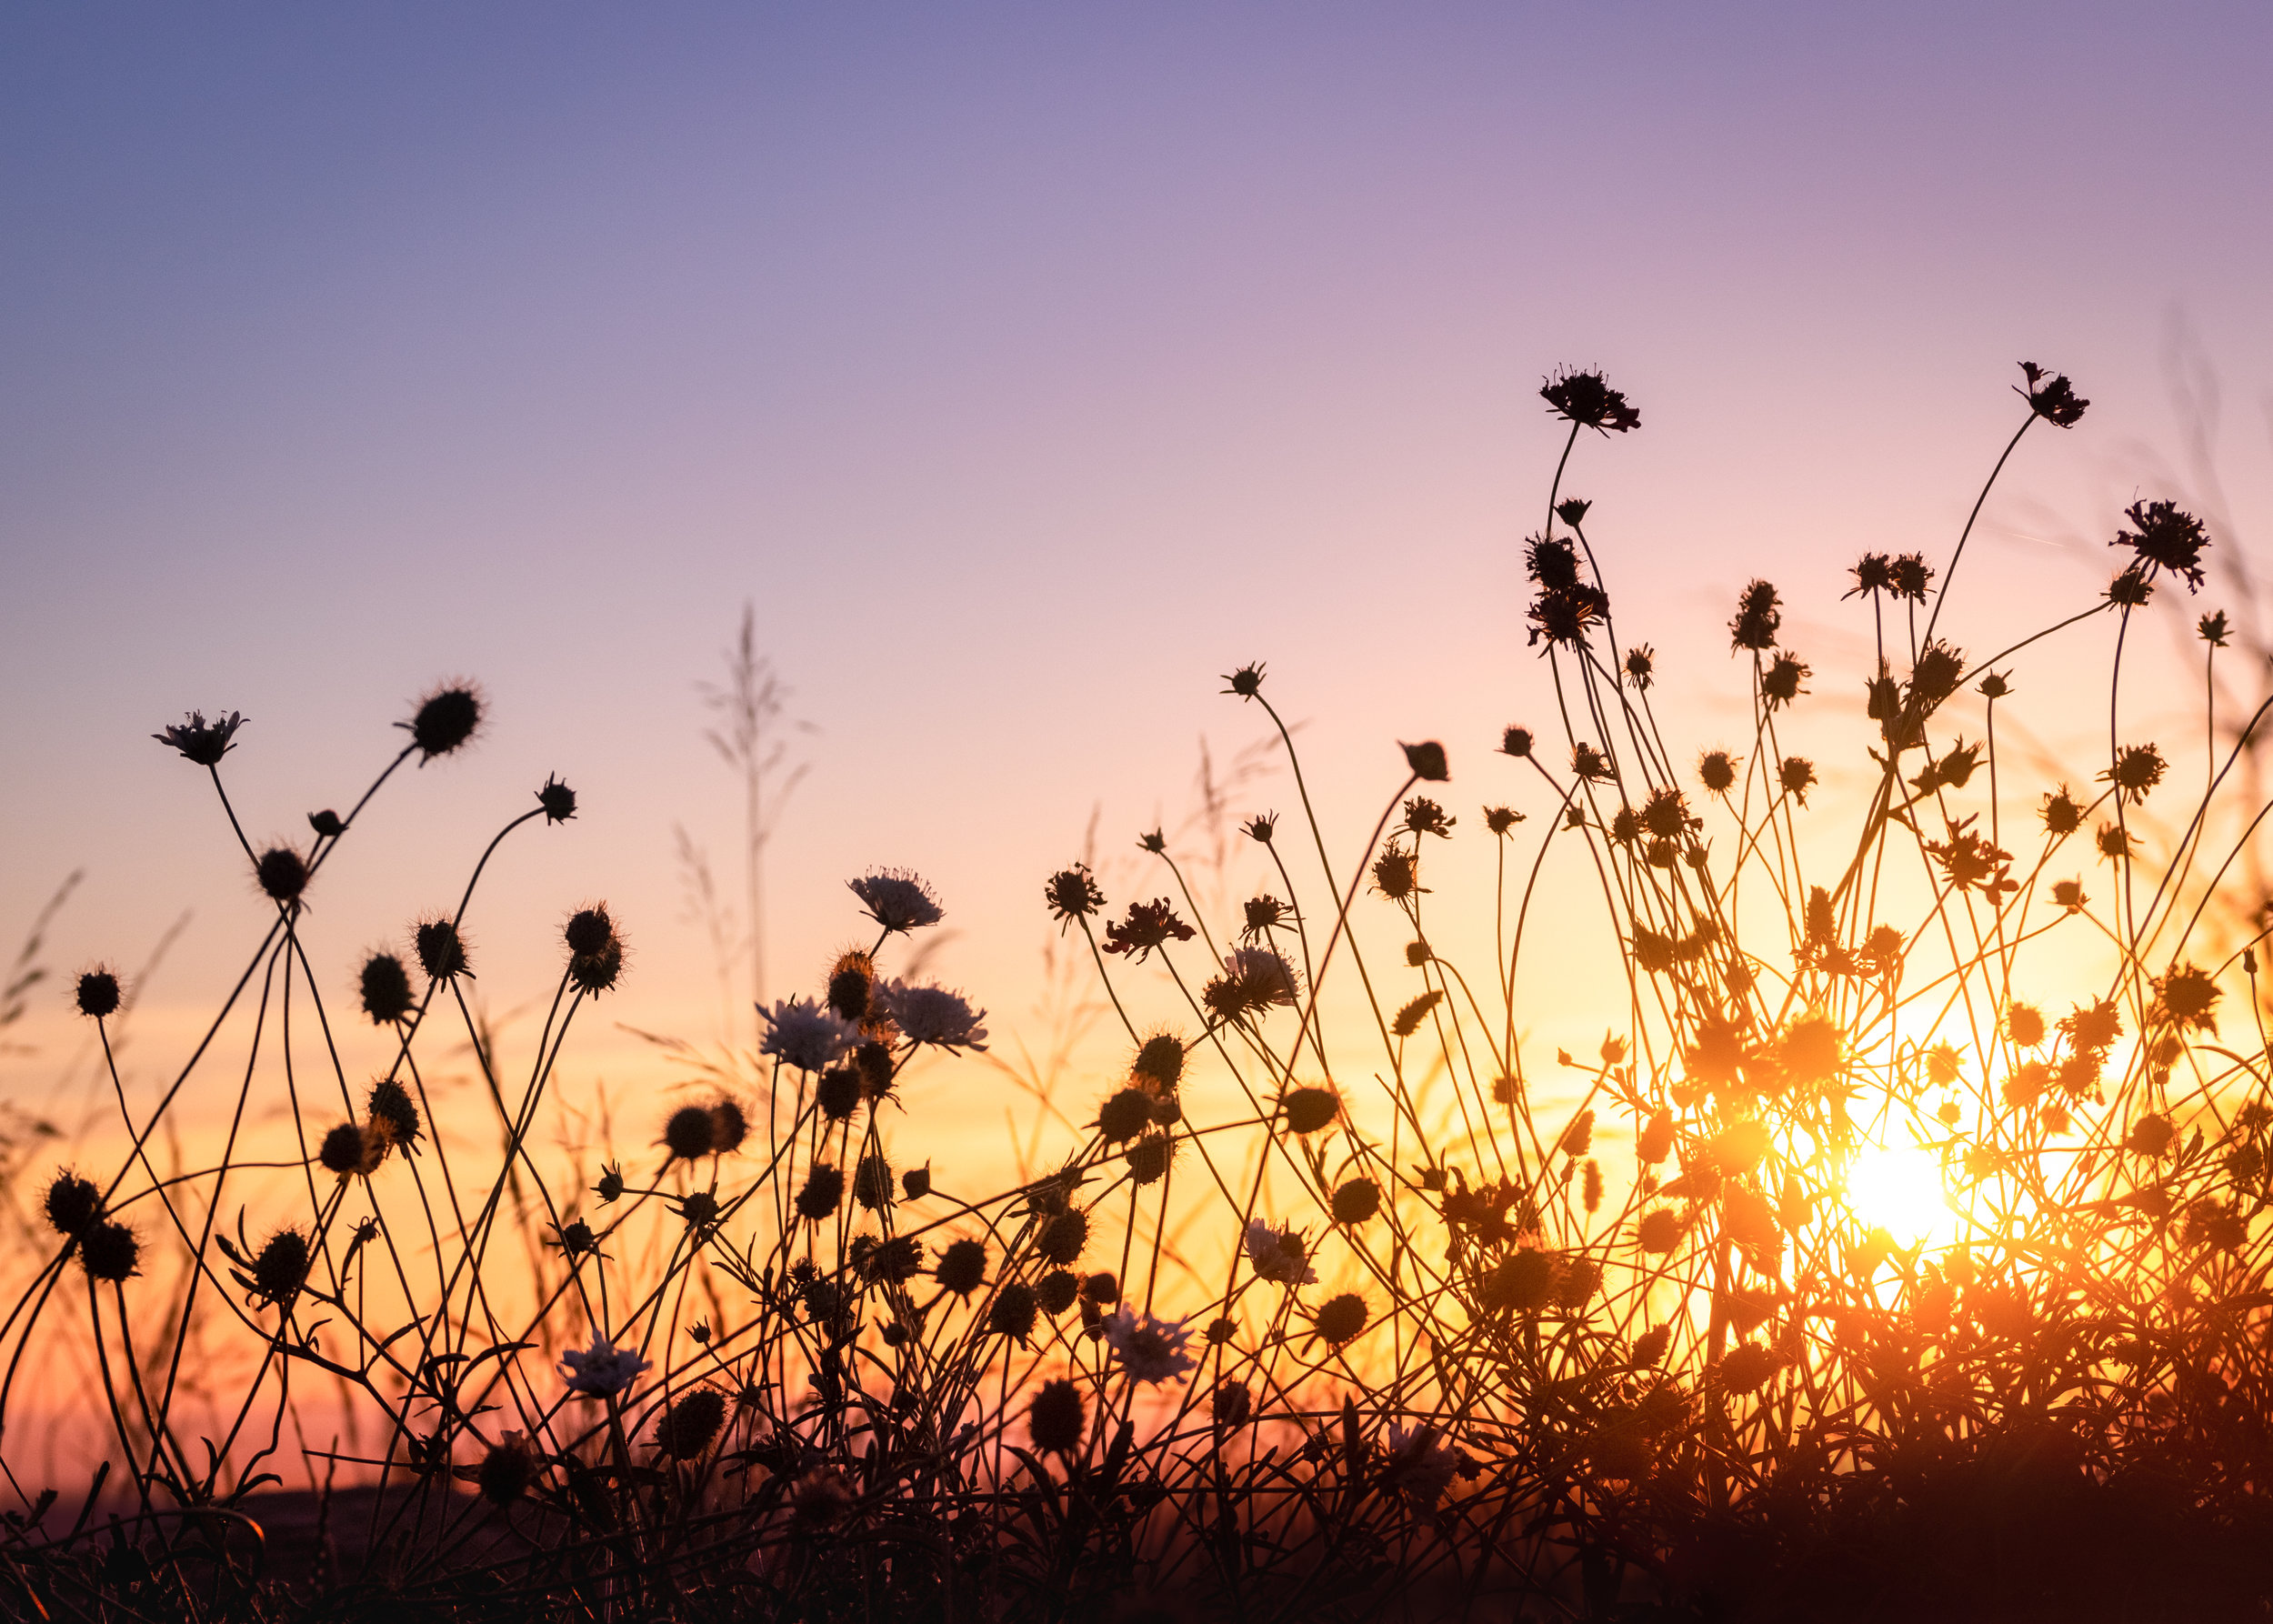 Sunset in a Field of Wild Flowers